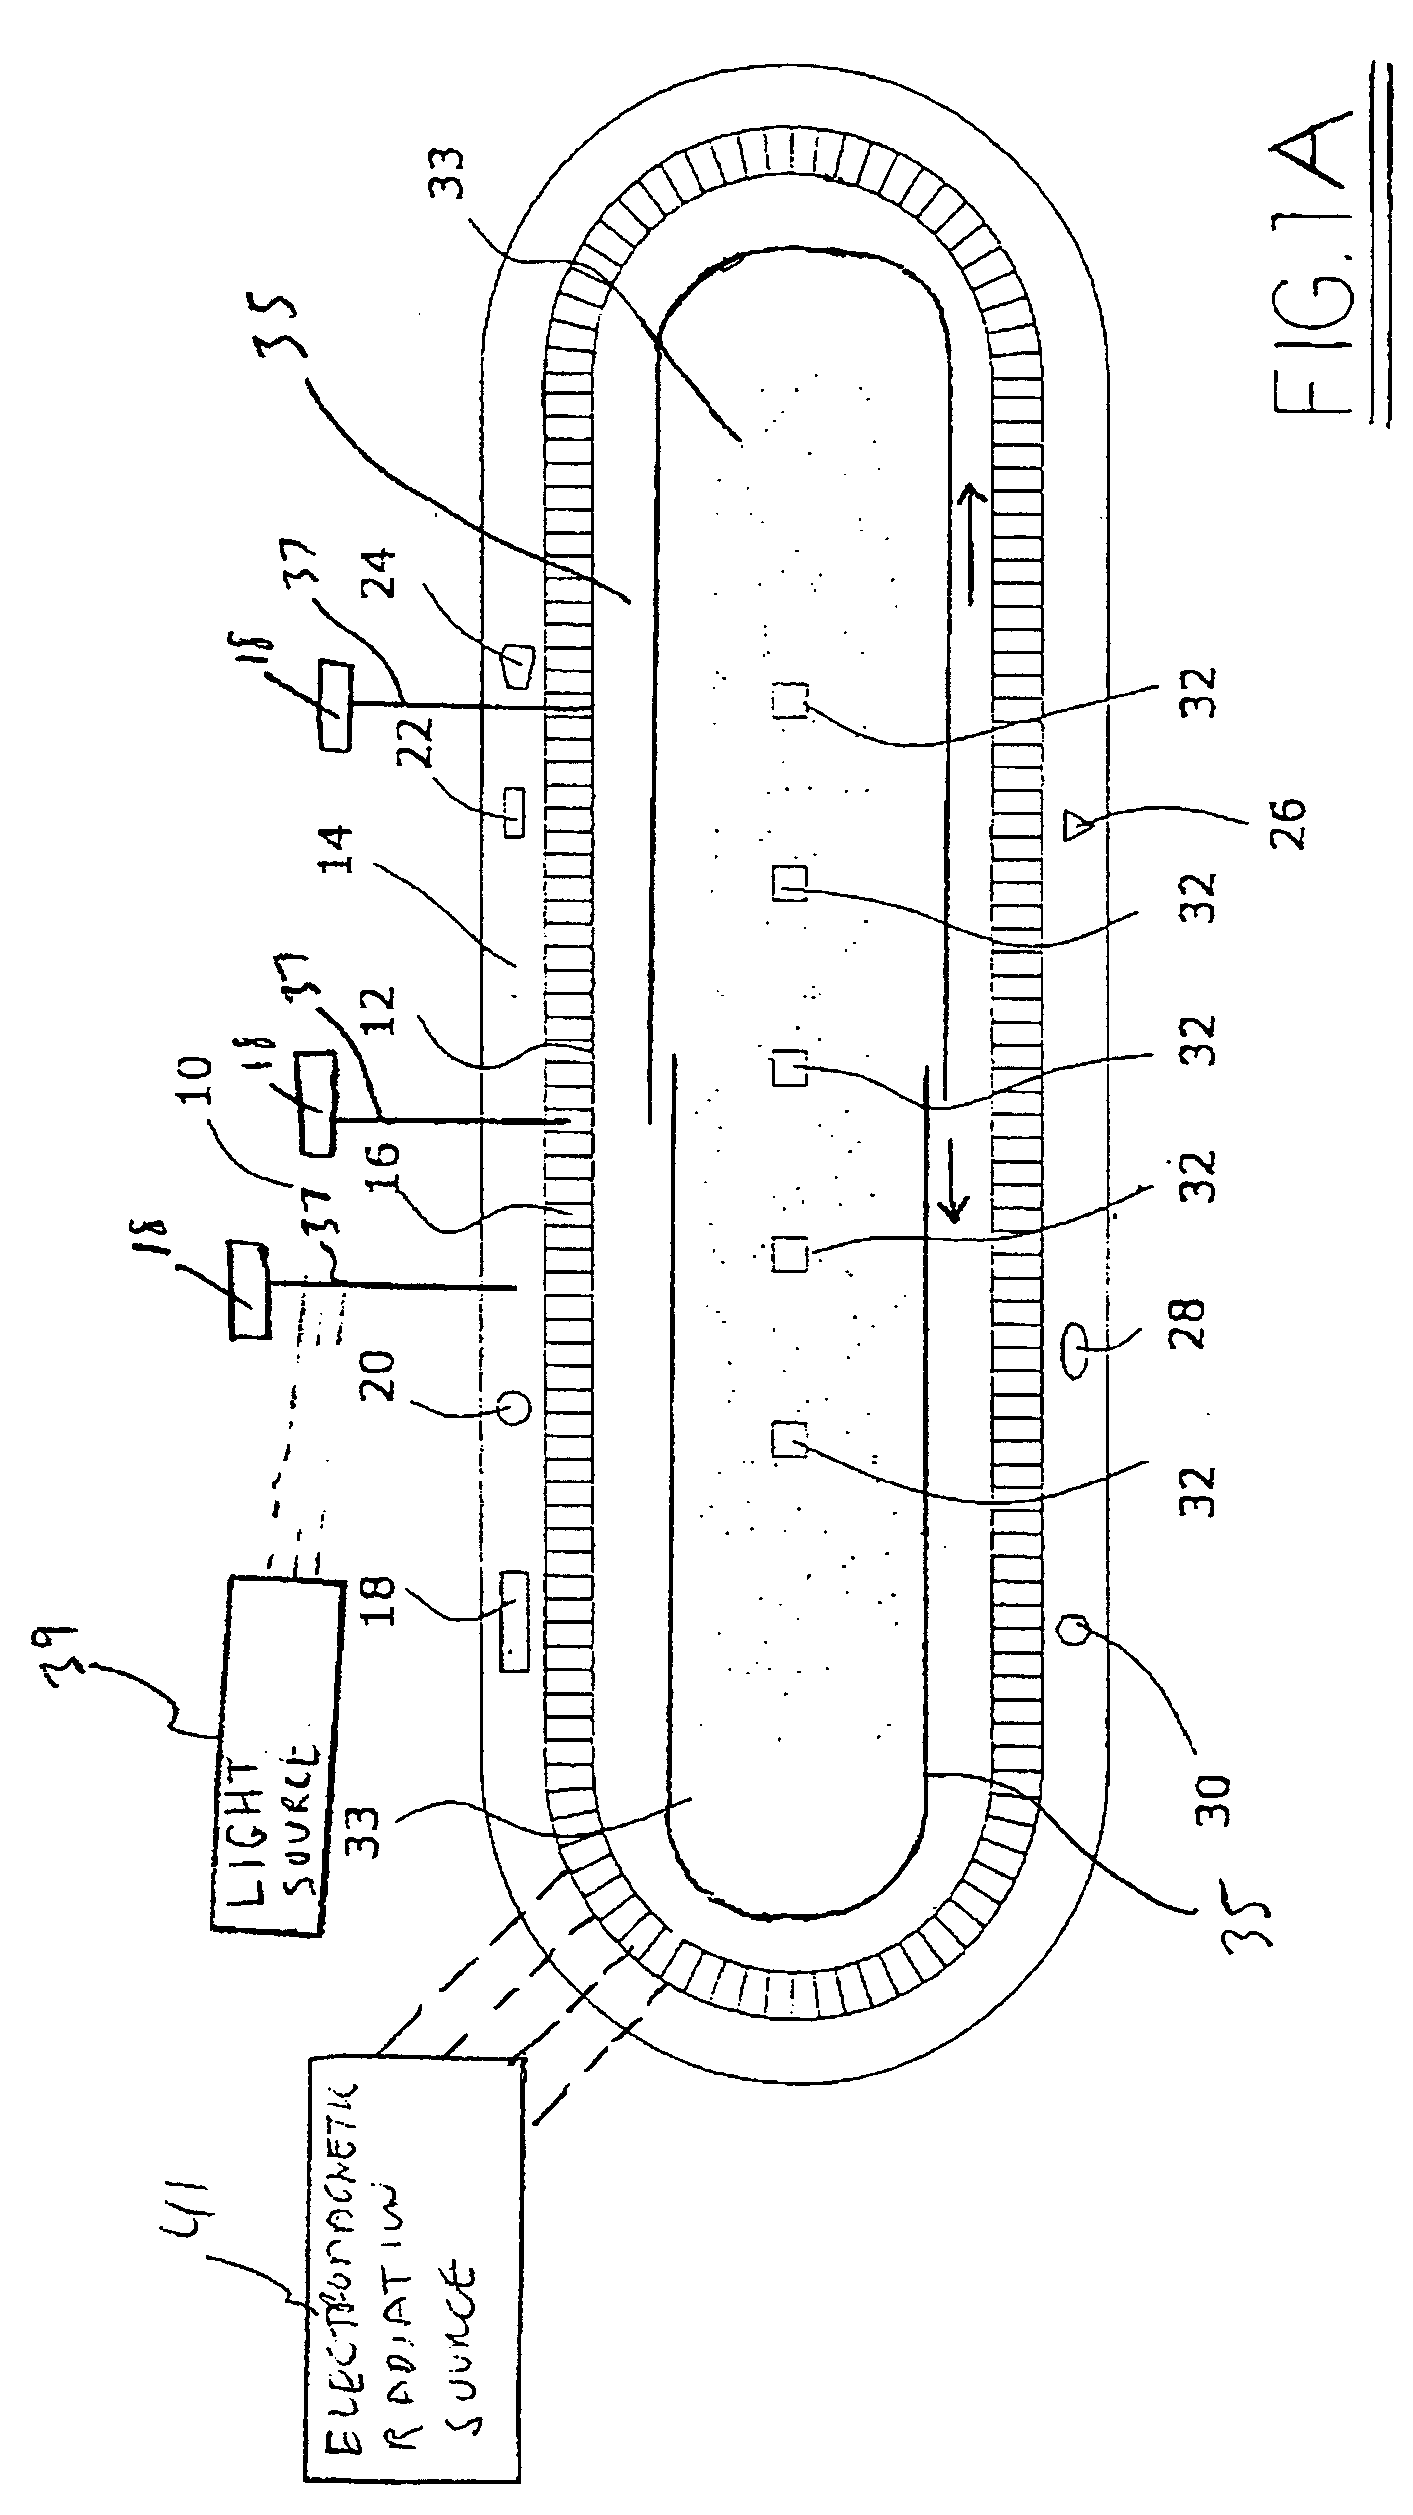 Medical device with low magnetic susceptibility